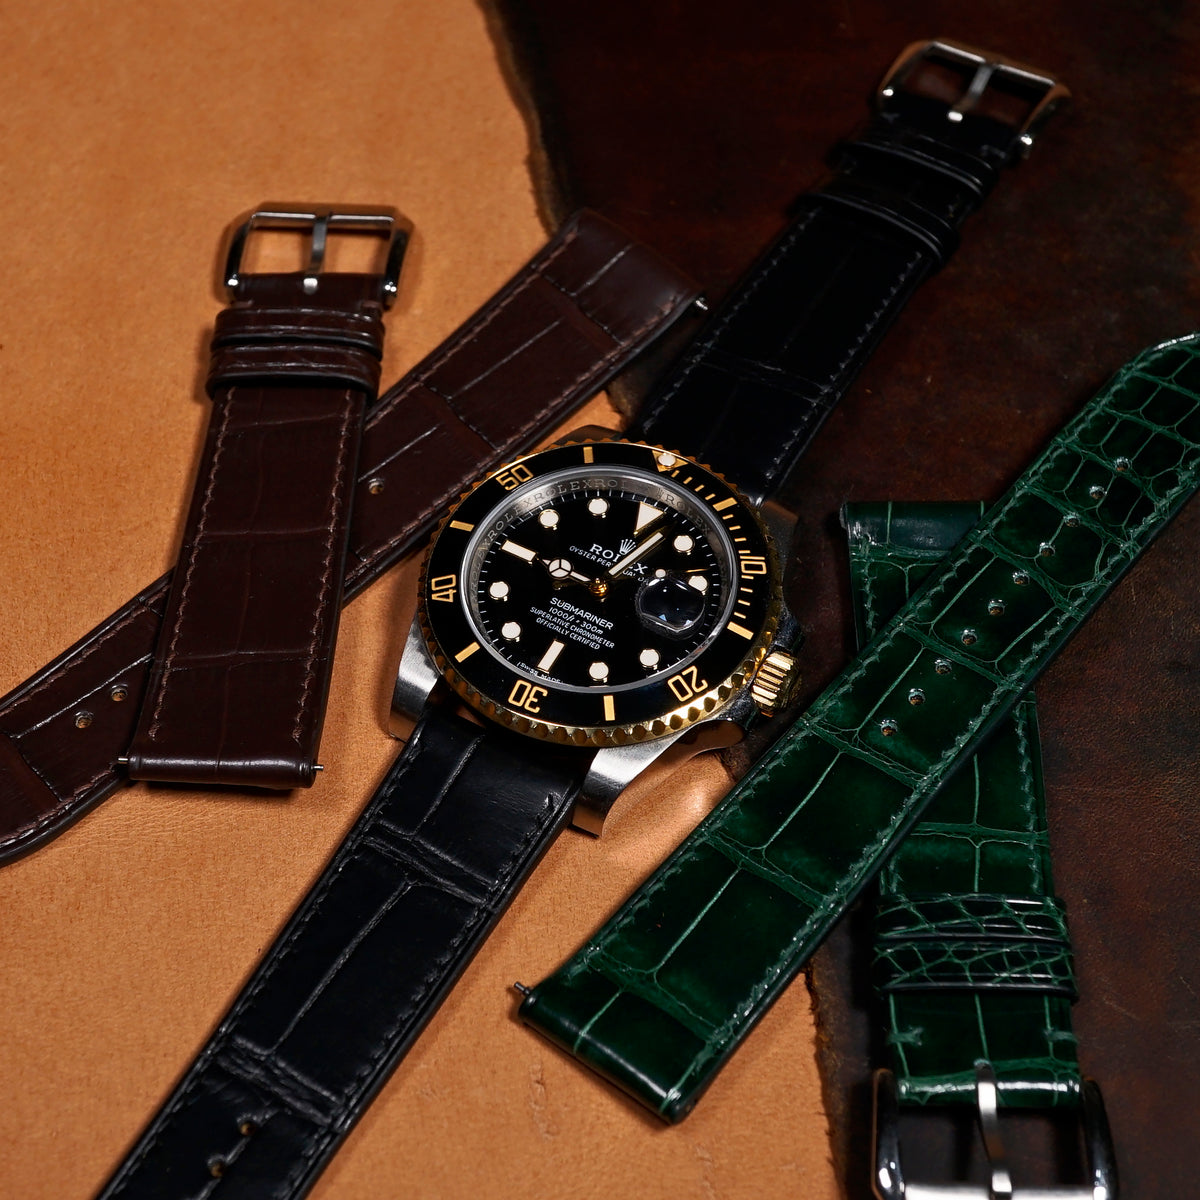 Alligator Leather Watch Strap in Black (Non-Glossy) - Nomad Watch Works SG